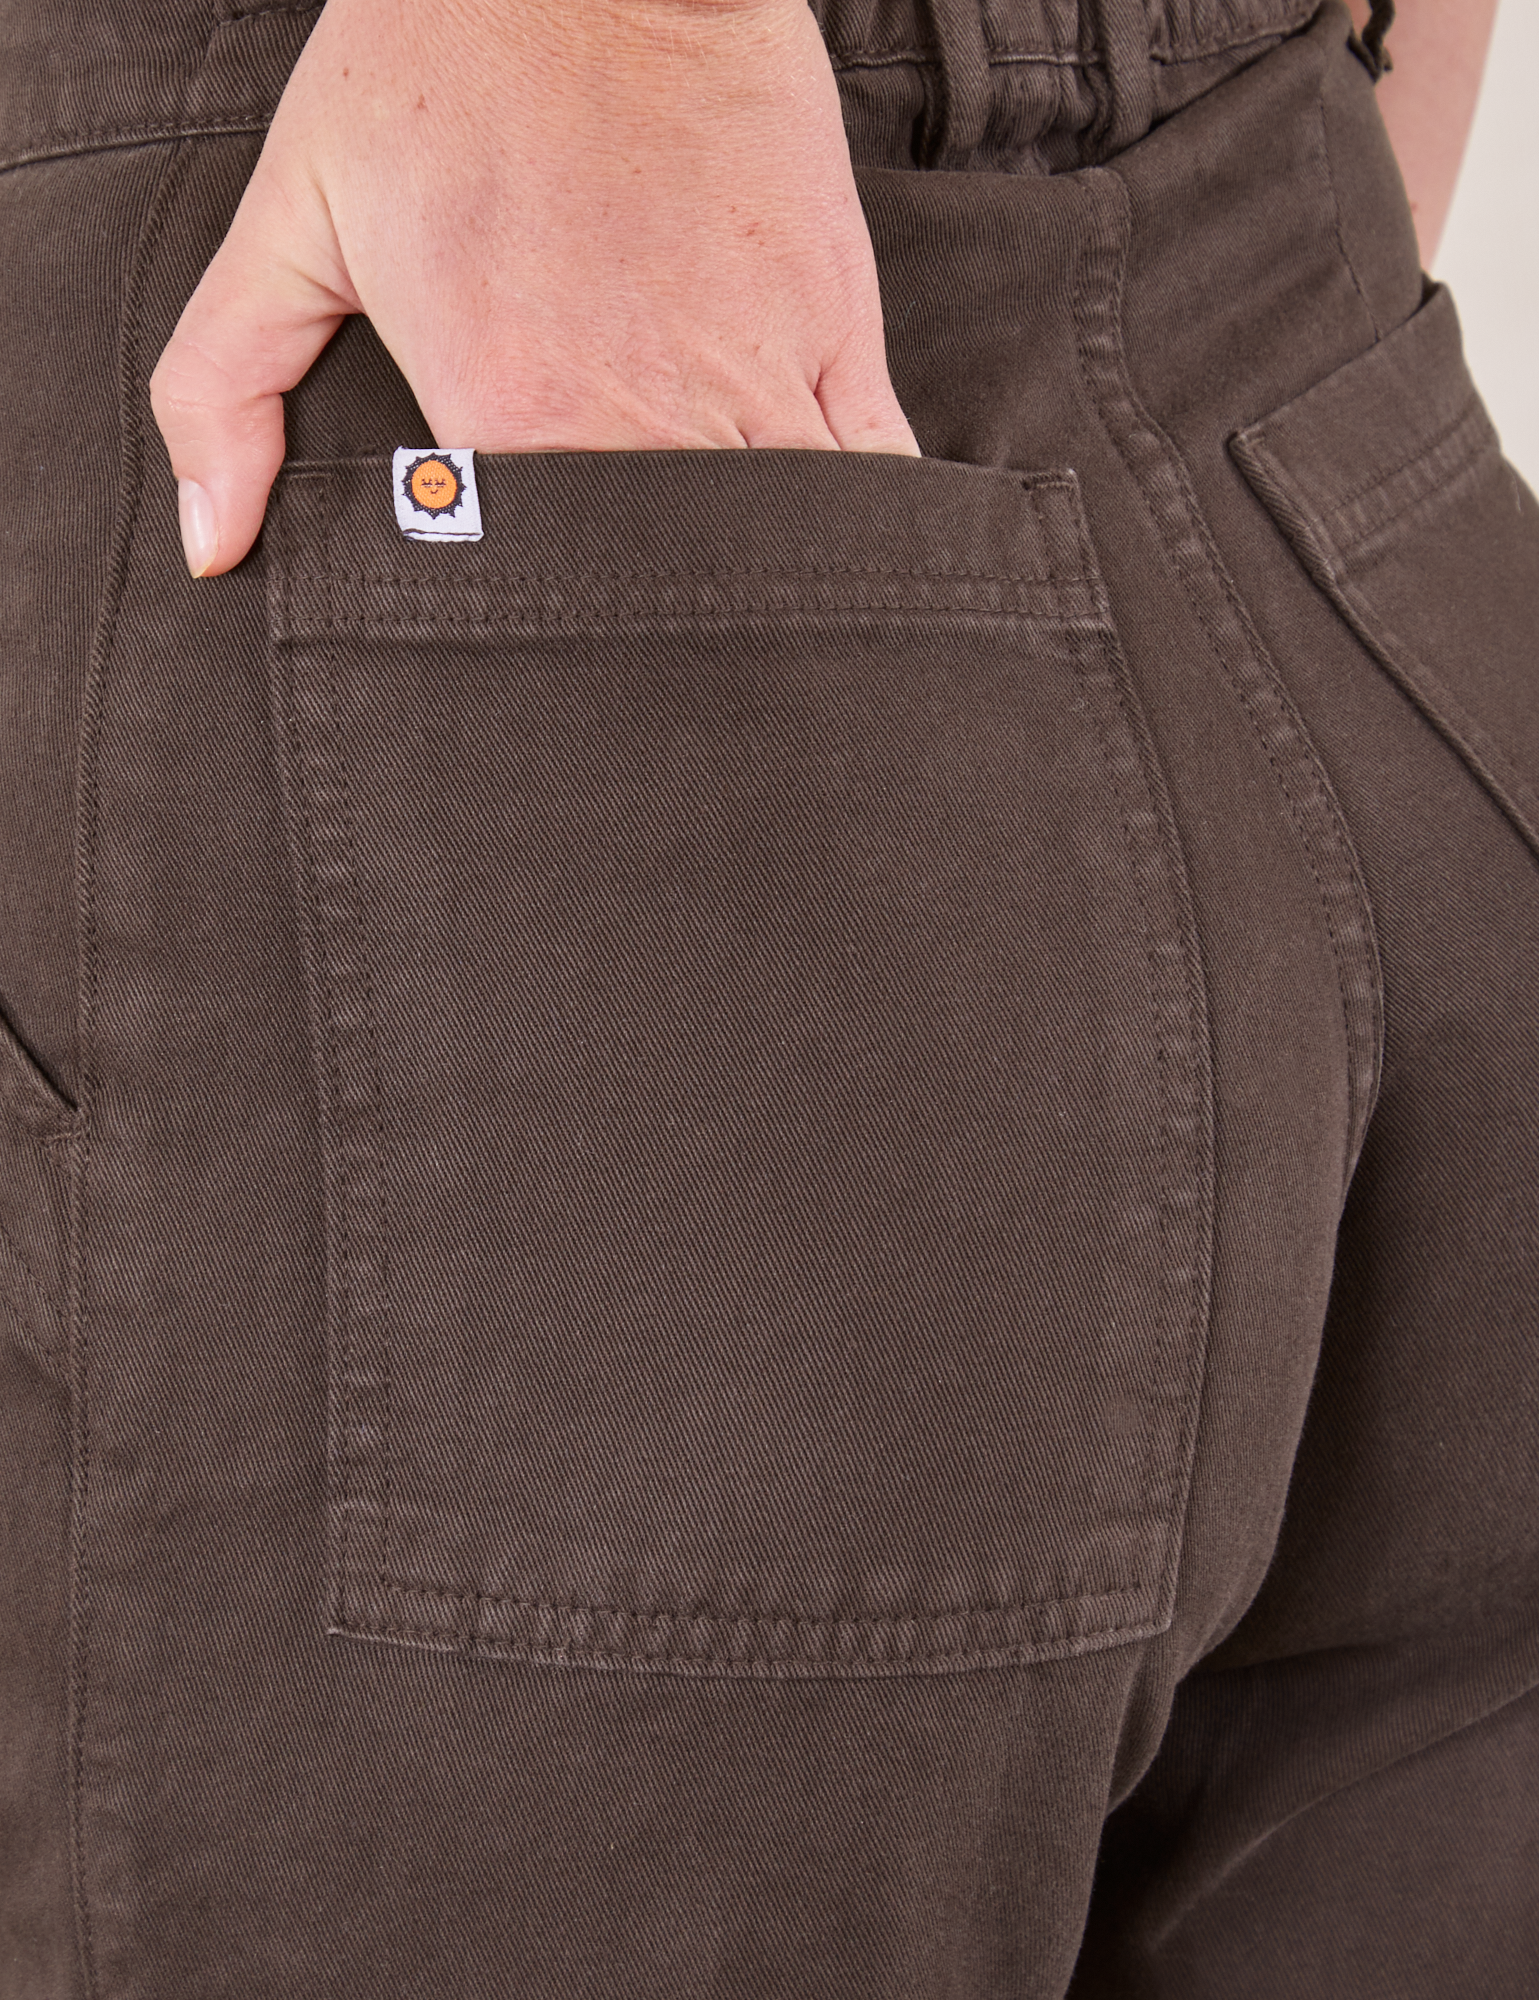 Pencil Pants in Espresso Brown back pocket close up. Scarlett has her hand in the pocket.